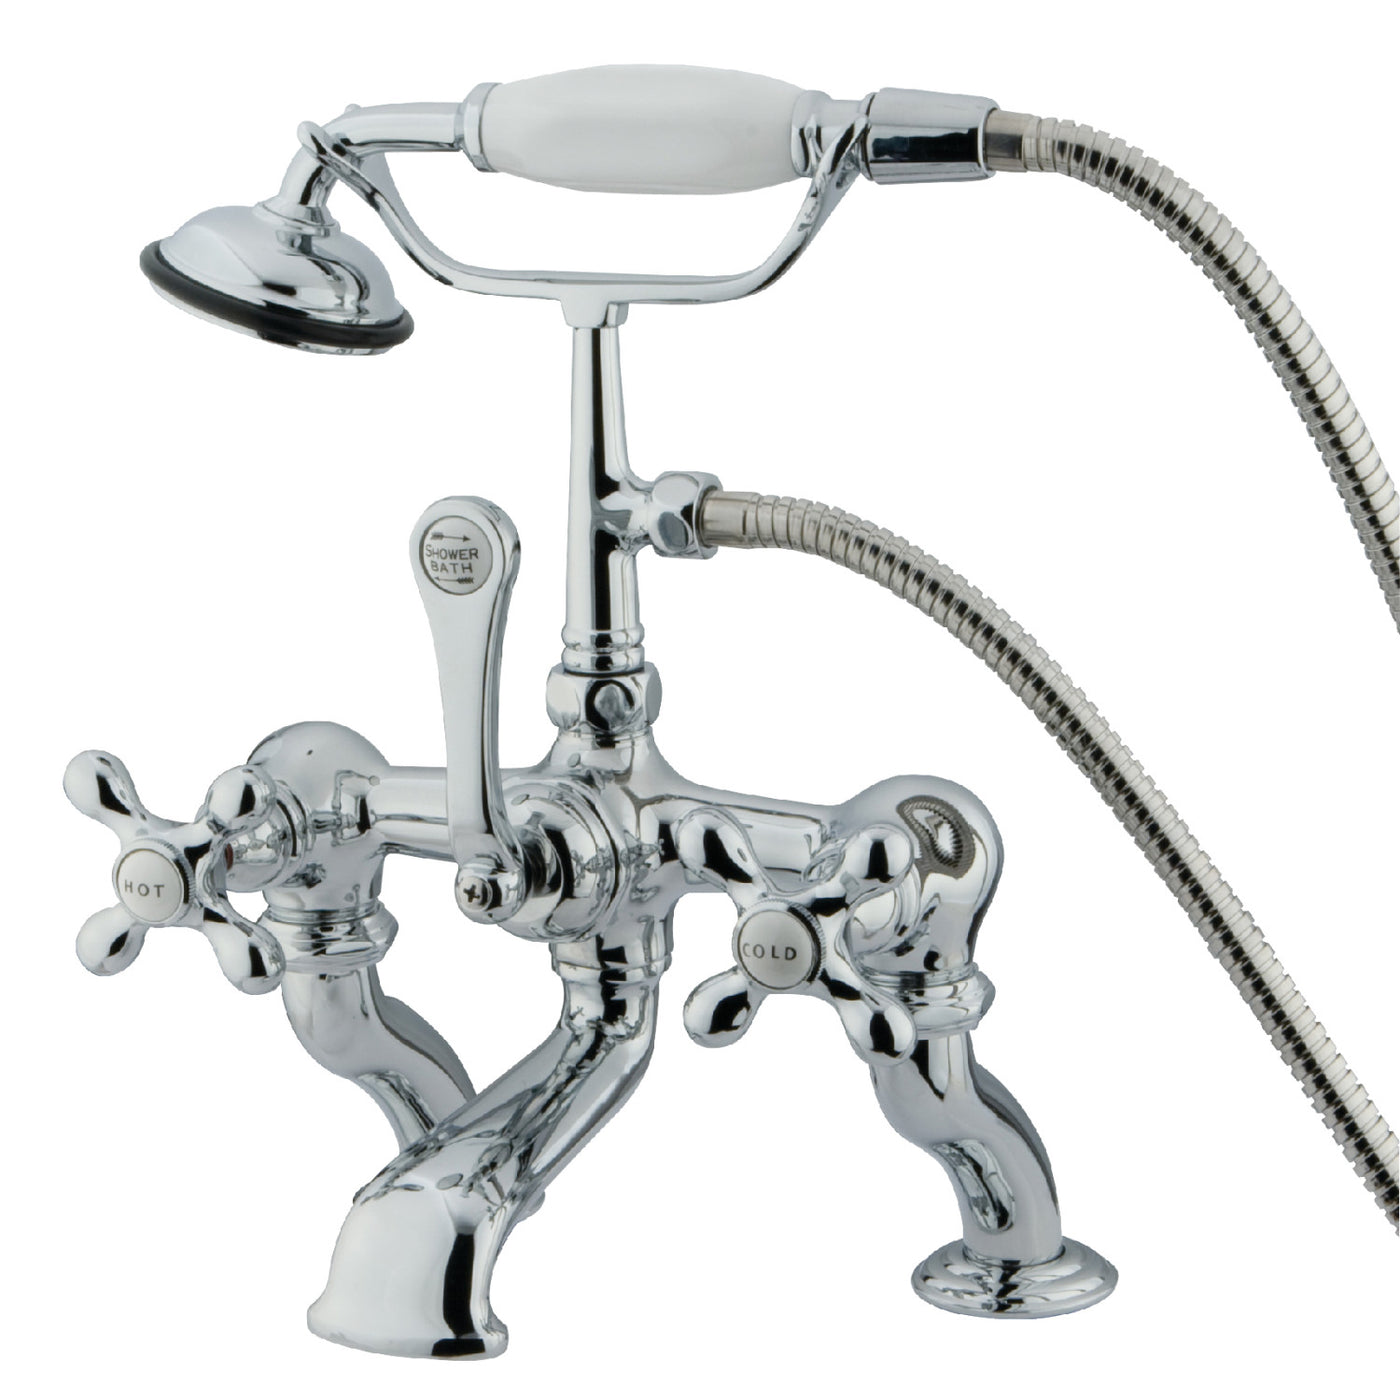 Elements of Design DT4101AX 7-Inch Deck Mount Tub Faucet with Hand Shower, Polished Chrome